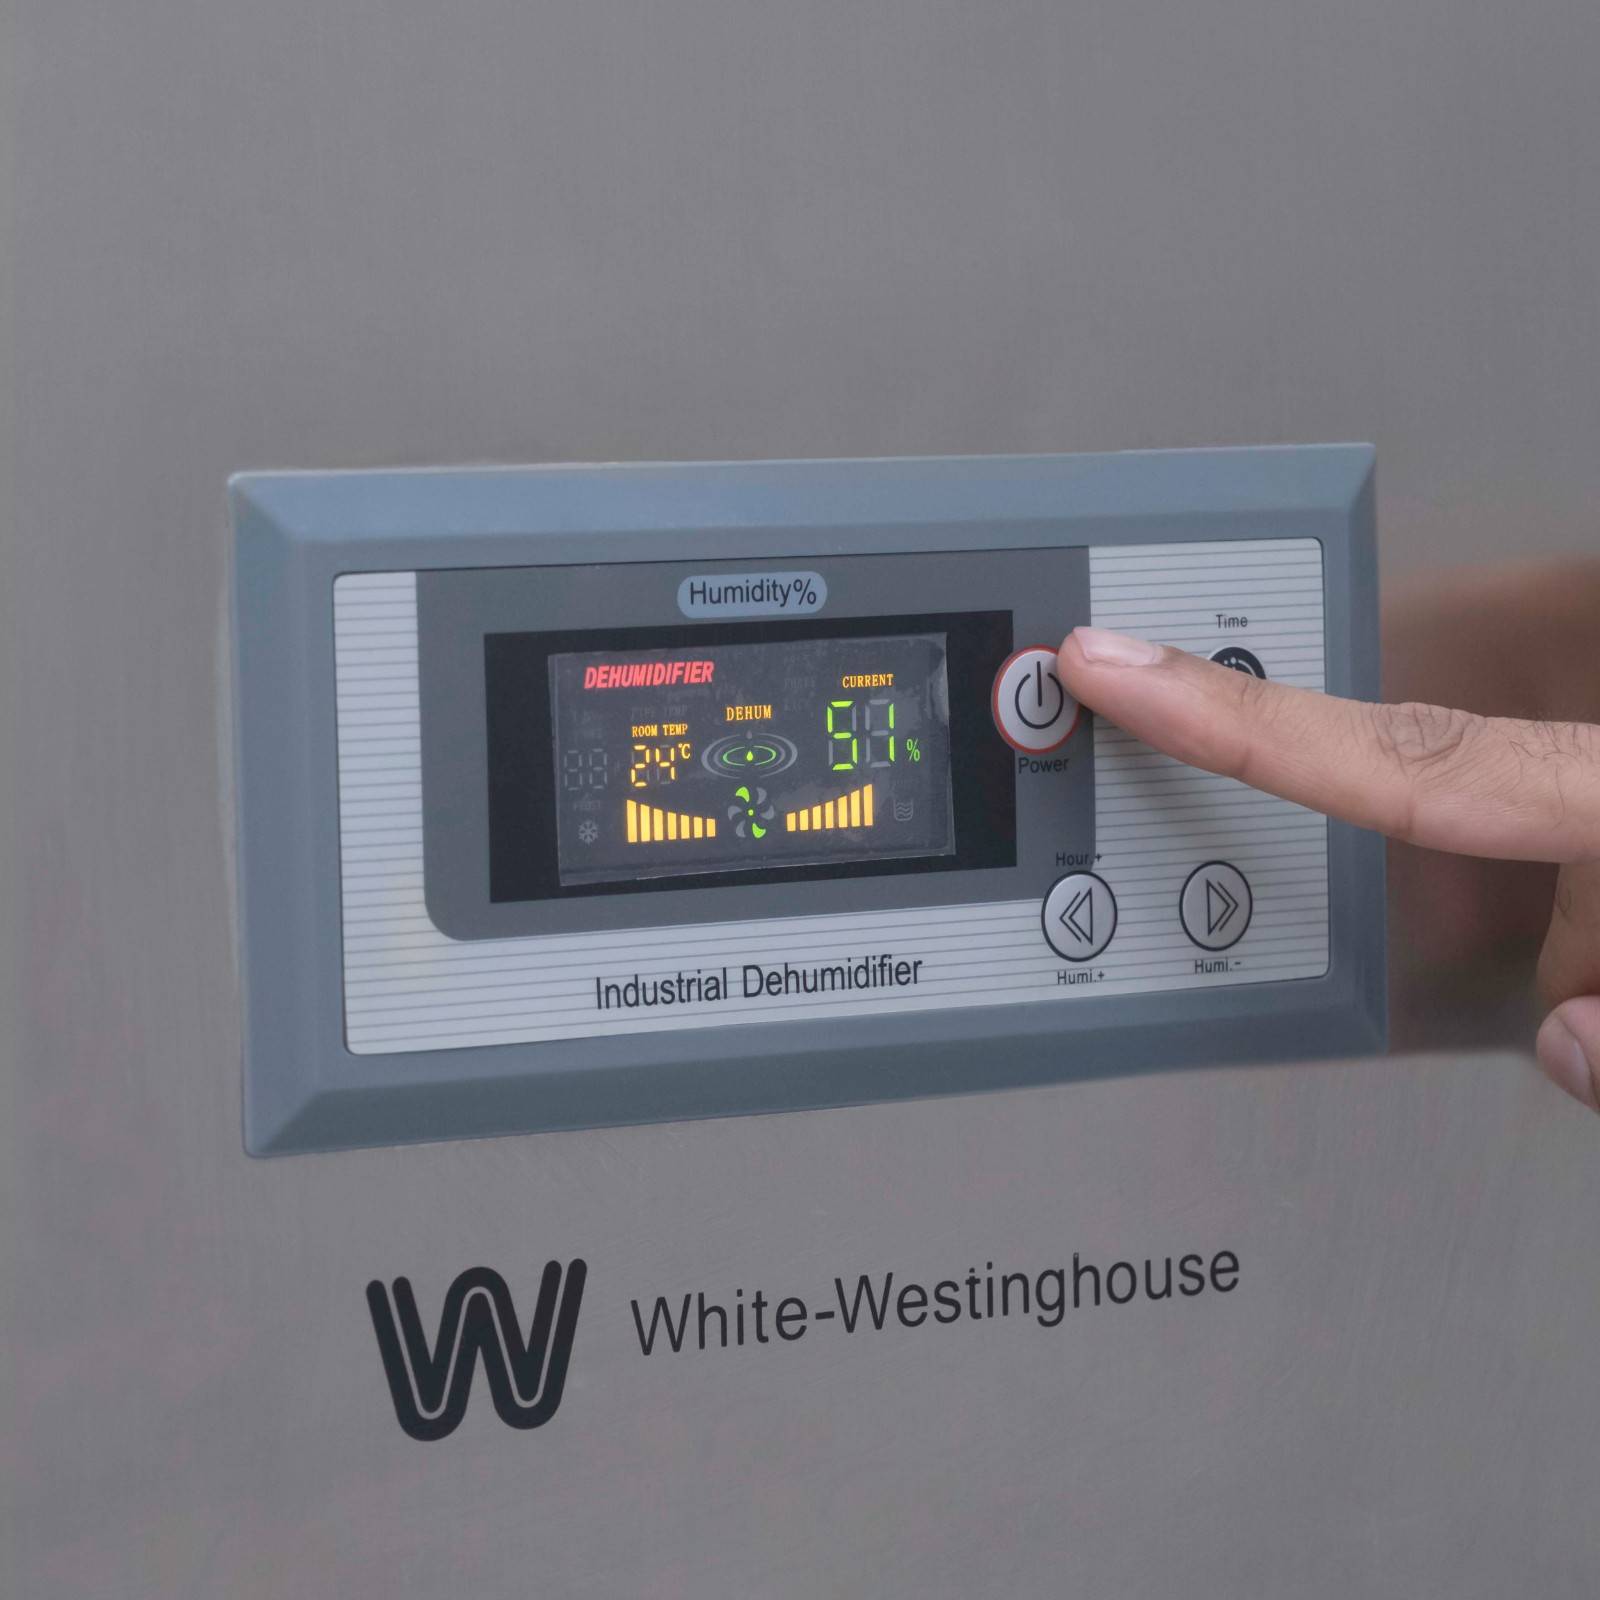 Close-up view of the digital control panel on the White Westinghouse Industrial Dehumidifier WDE360S, with a person's finger pressing the power button. The display shows various settings and indicators for humidity control, ensuring easy operation and precise adjustments. Ideal for maintaining optimal humidity levels in large commercial and industrial spaces.